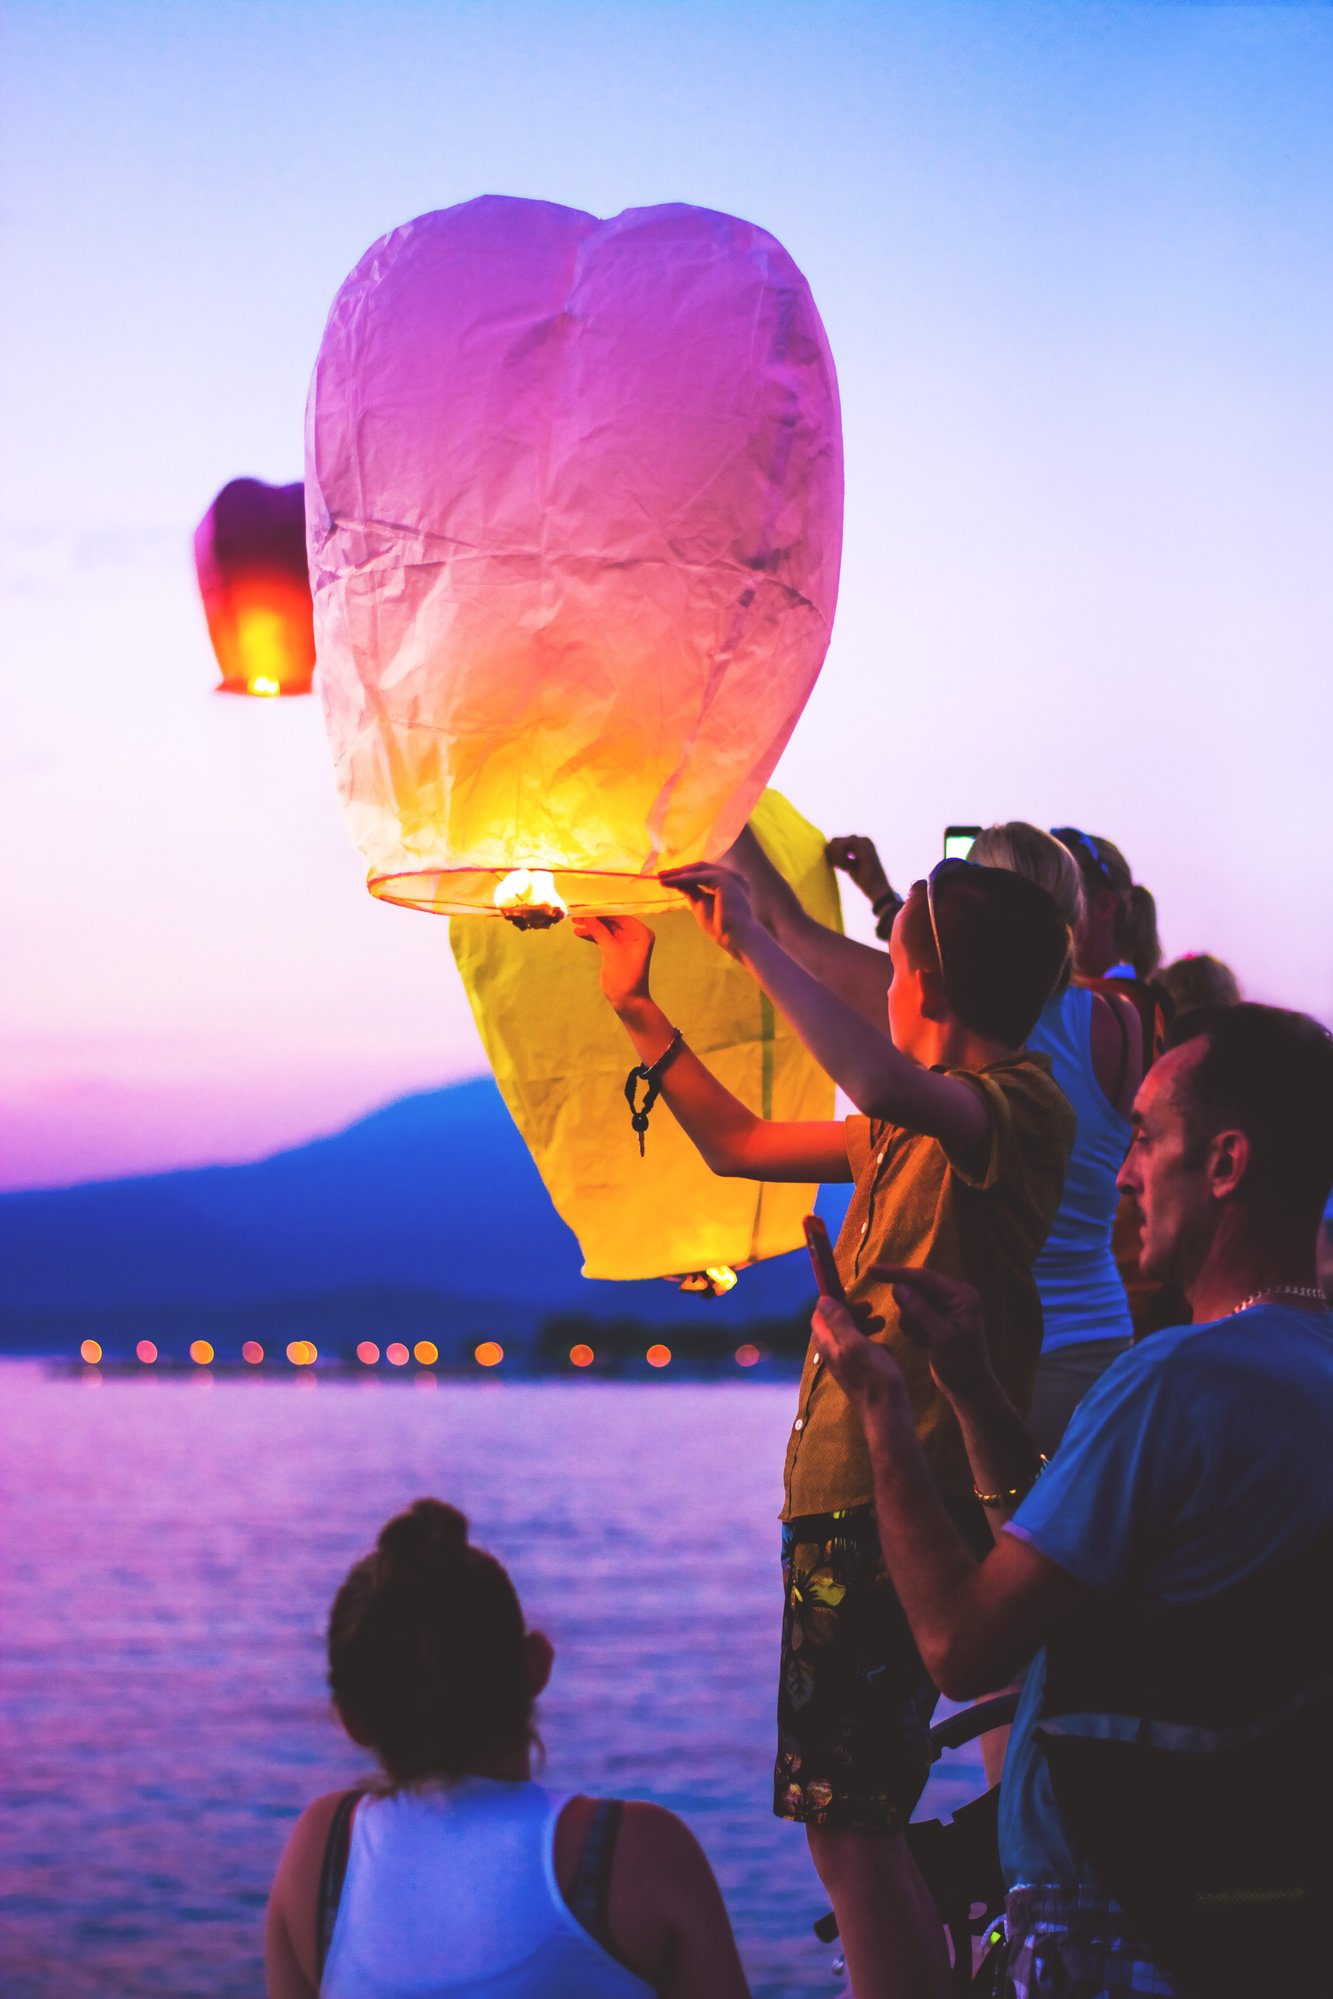 Family releasing lanterns into sky at sunset